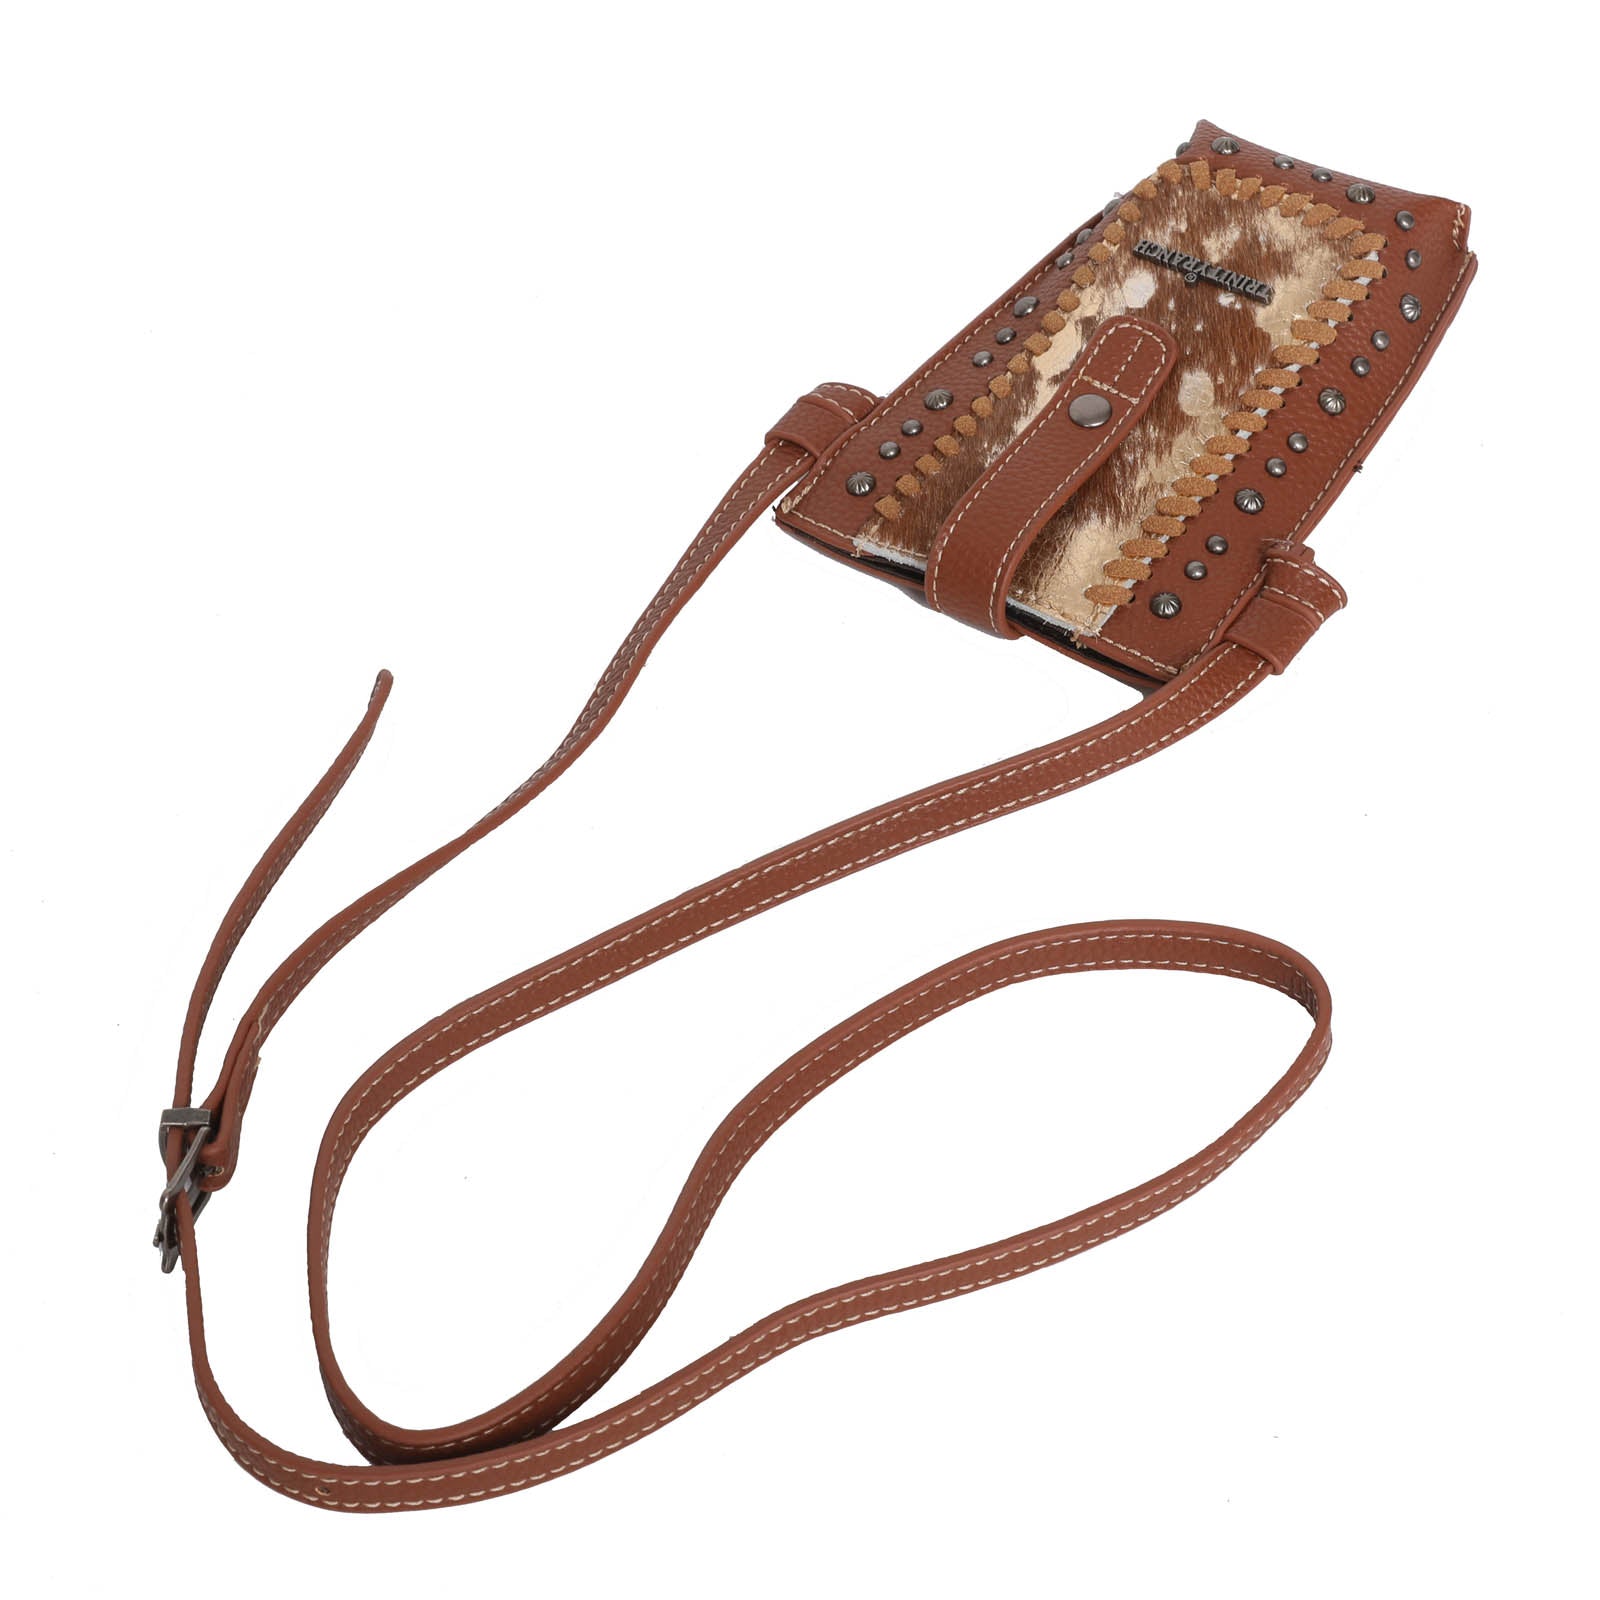 Trinity Ranch Hair-On Cowhide Collection Crossbody Phone Case - Montana West World